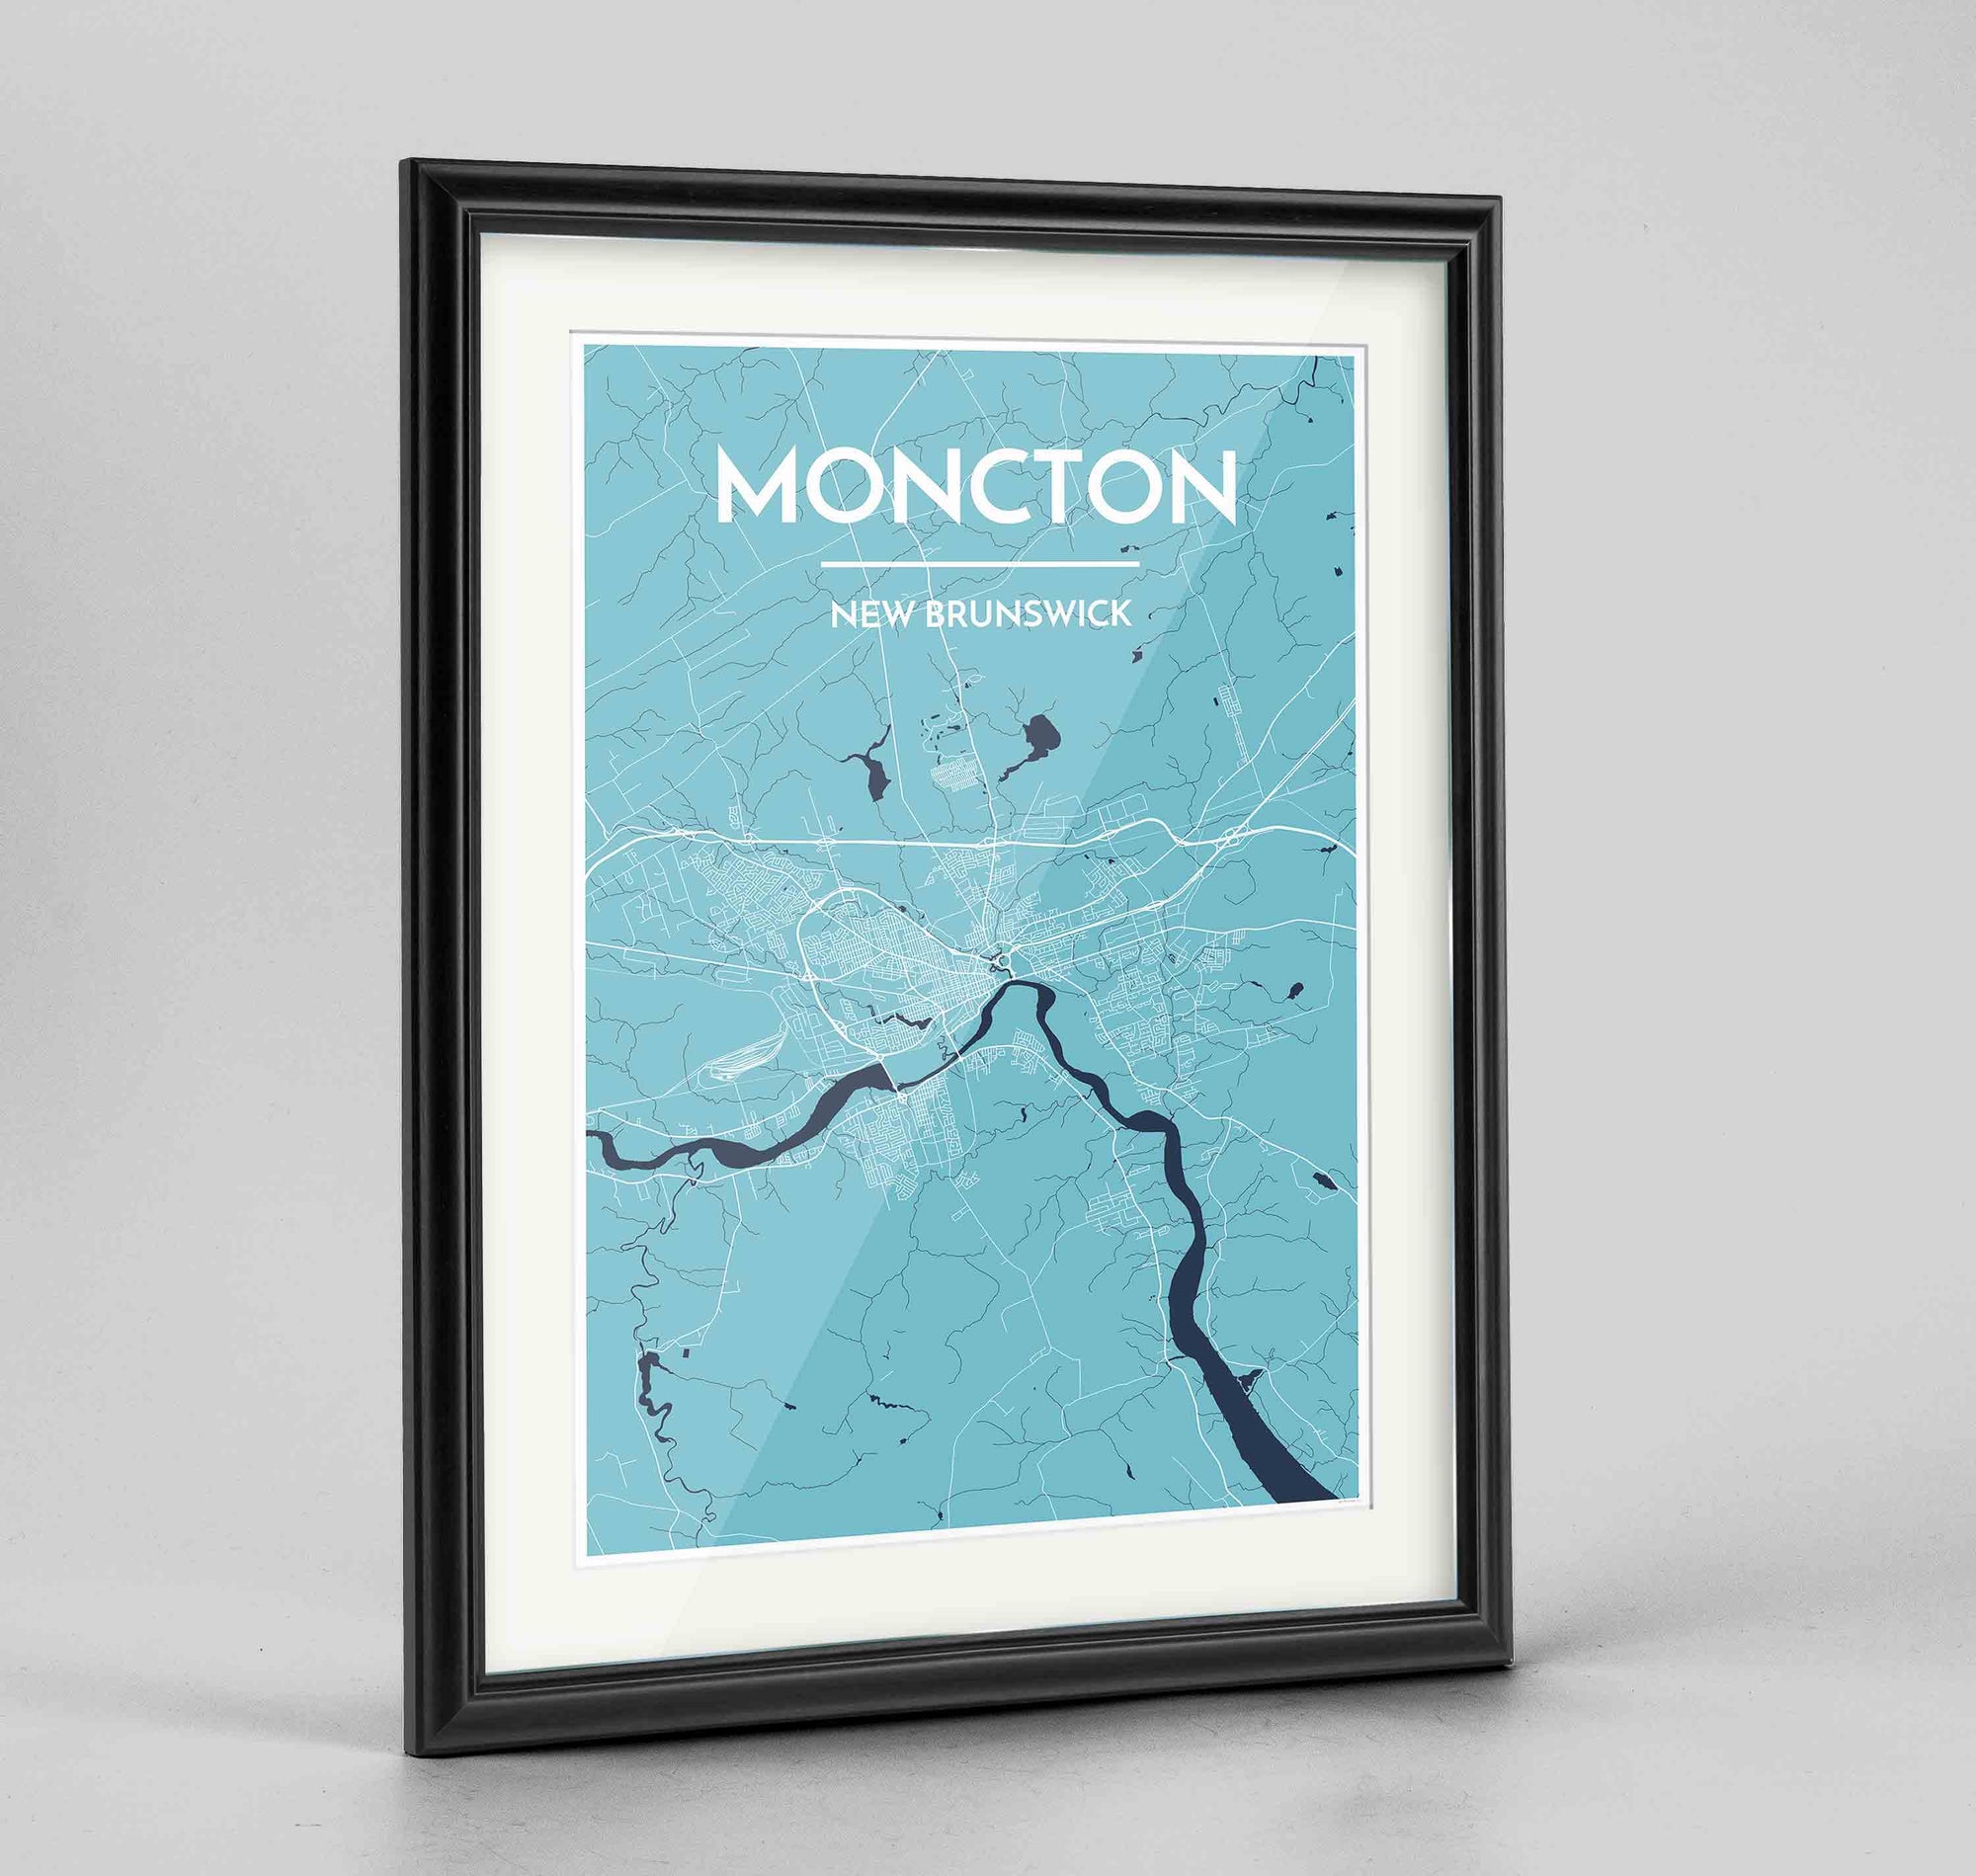 Framed Moncton City Map 24x36" Traditional Black frame Point Two Design Group